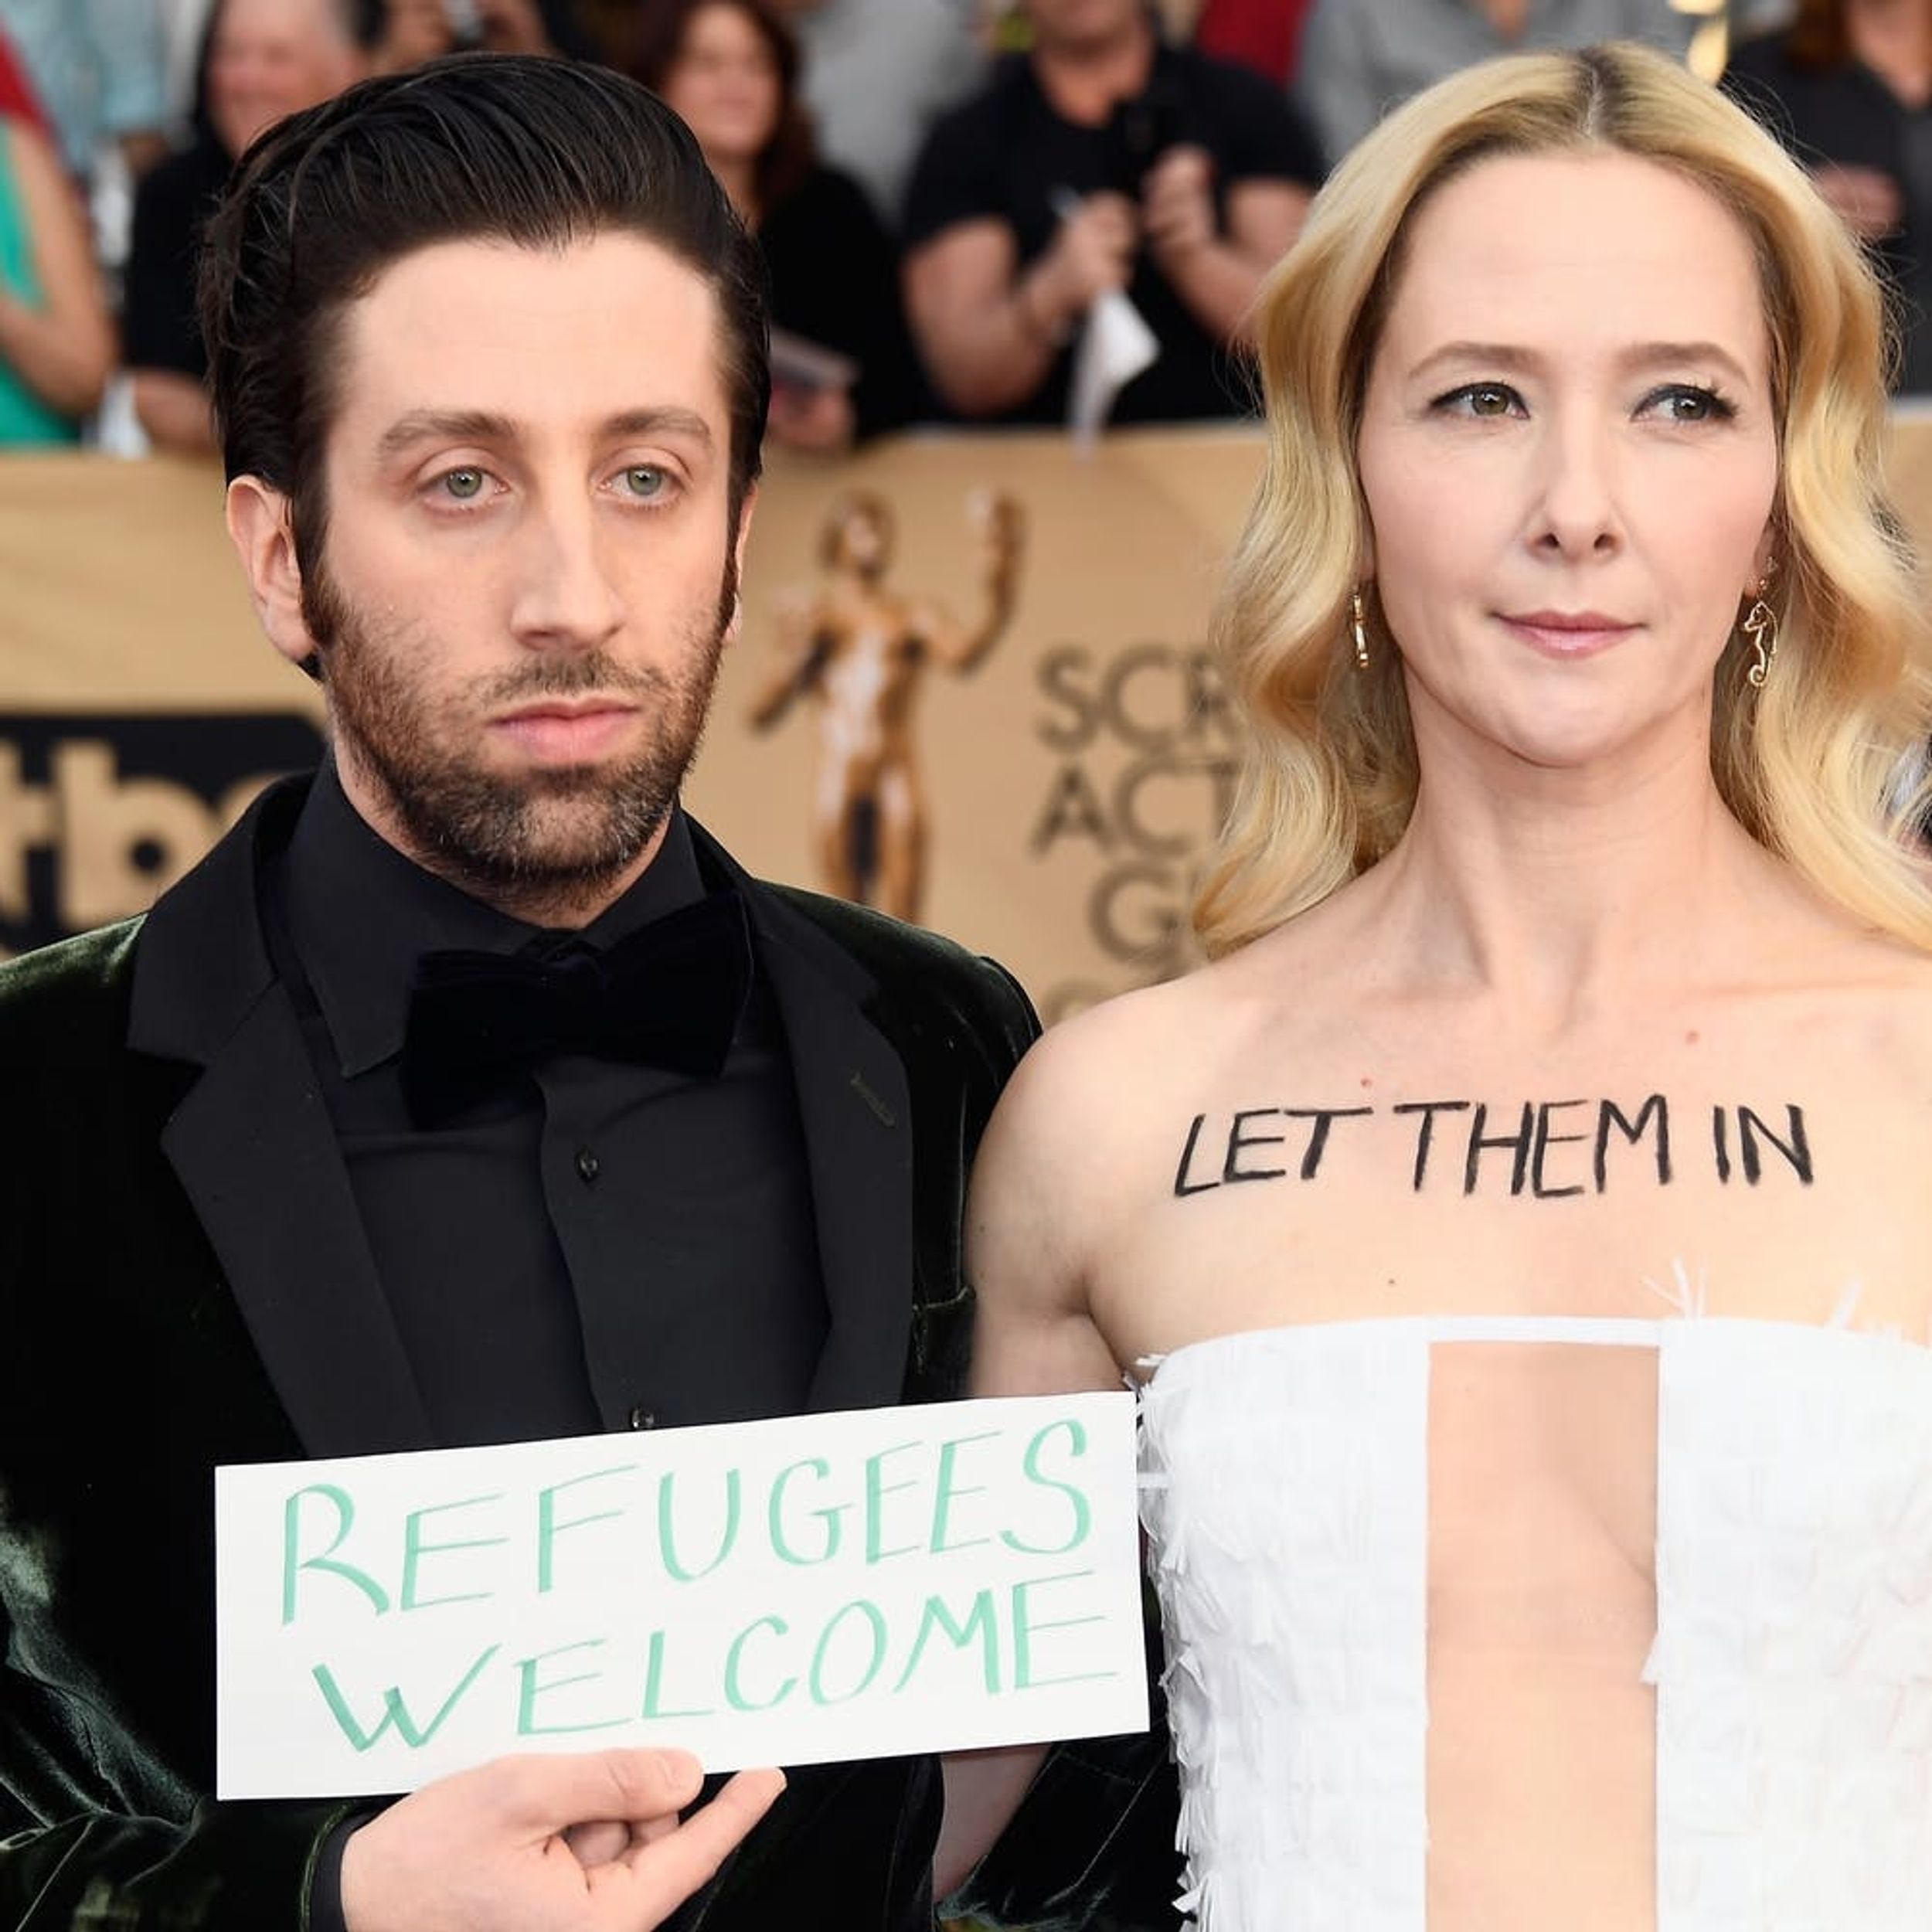 This Couple’s SAG Awards Garb Was a Protest of President Trump’s Immigration Orders